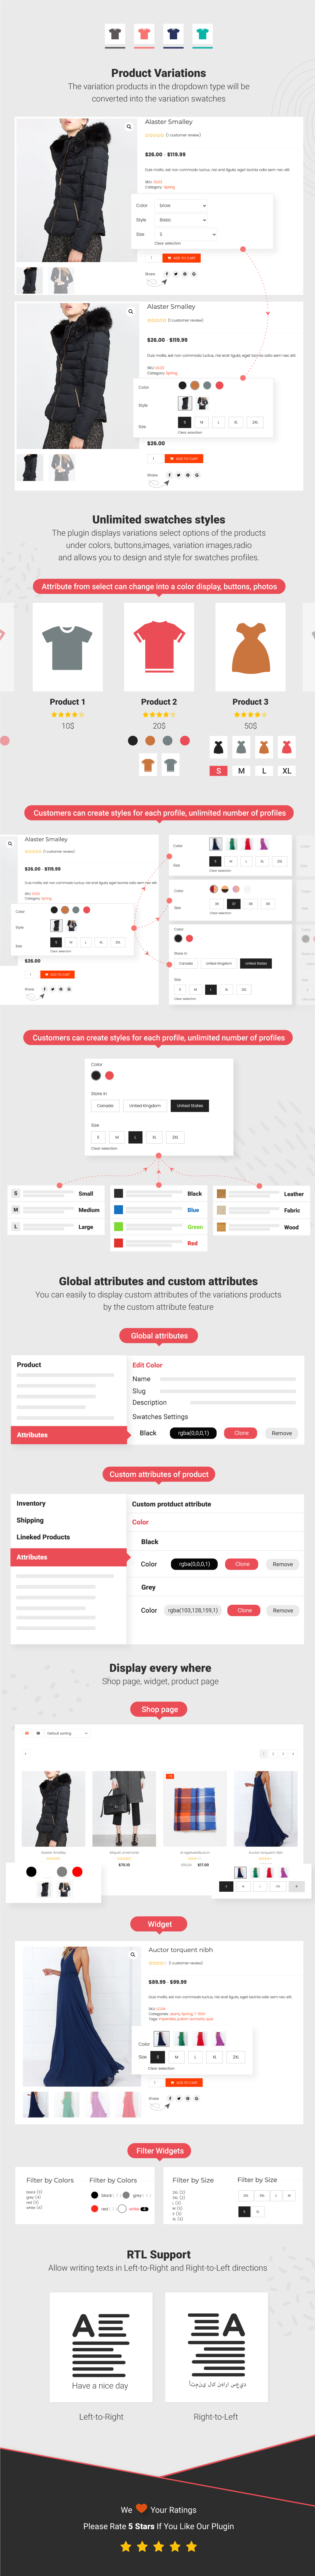 Infographic WooCommerce Product Variations Swatches